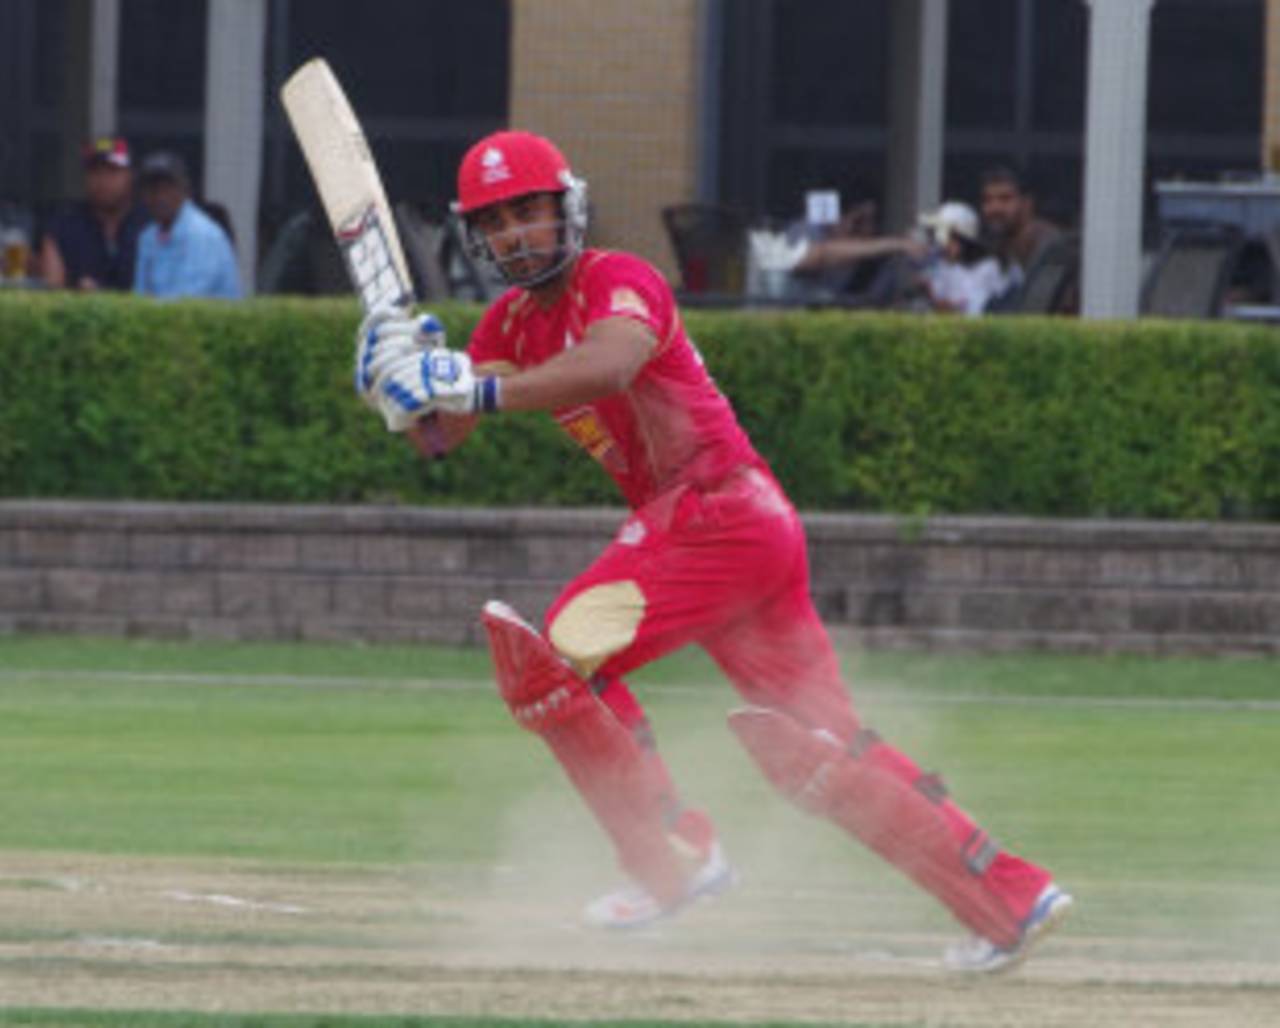 Ashish Bagai will lead Canada in the WCL Championship matches as they seek to salvage some pride&nbsp;&nbsp;&bull;&nbsp;&nbsp;Eddie Norfolk